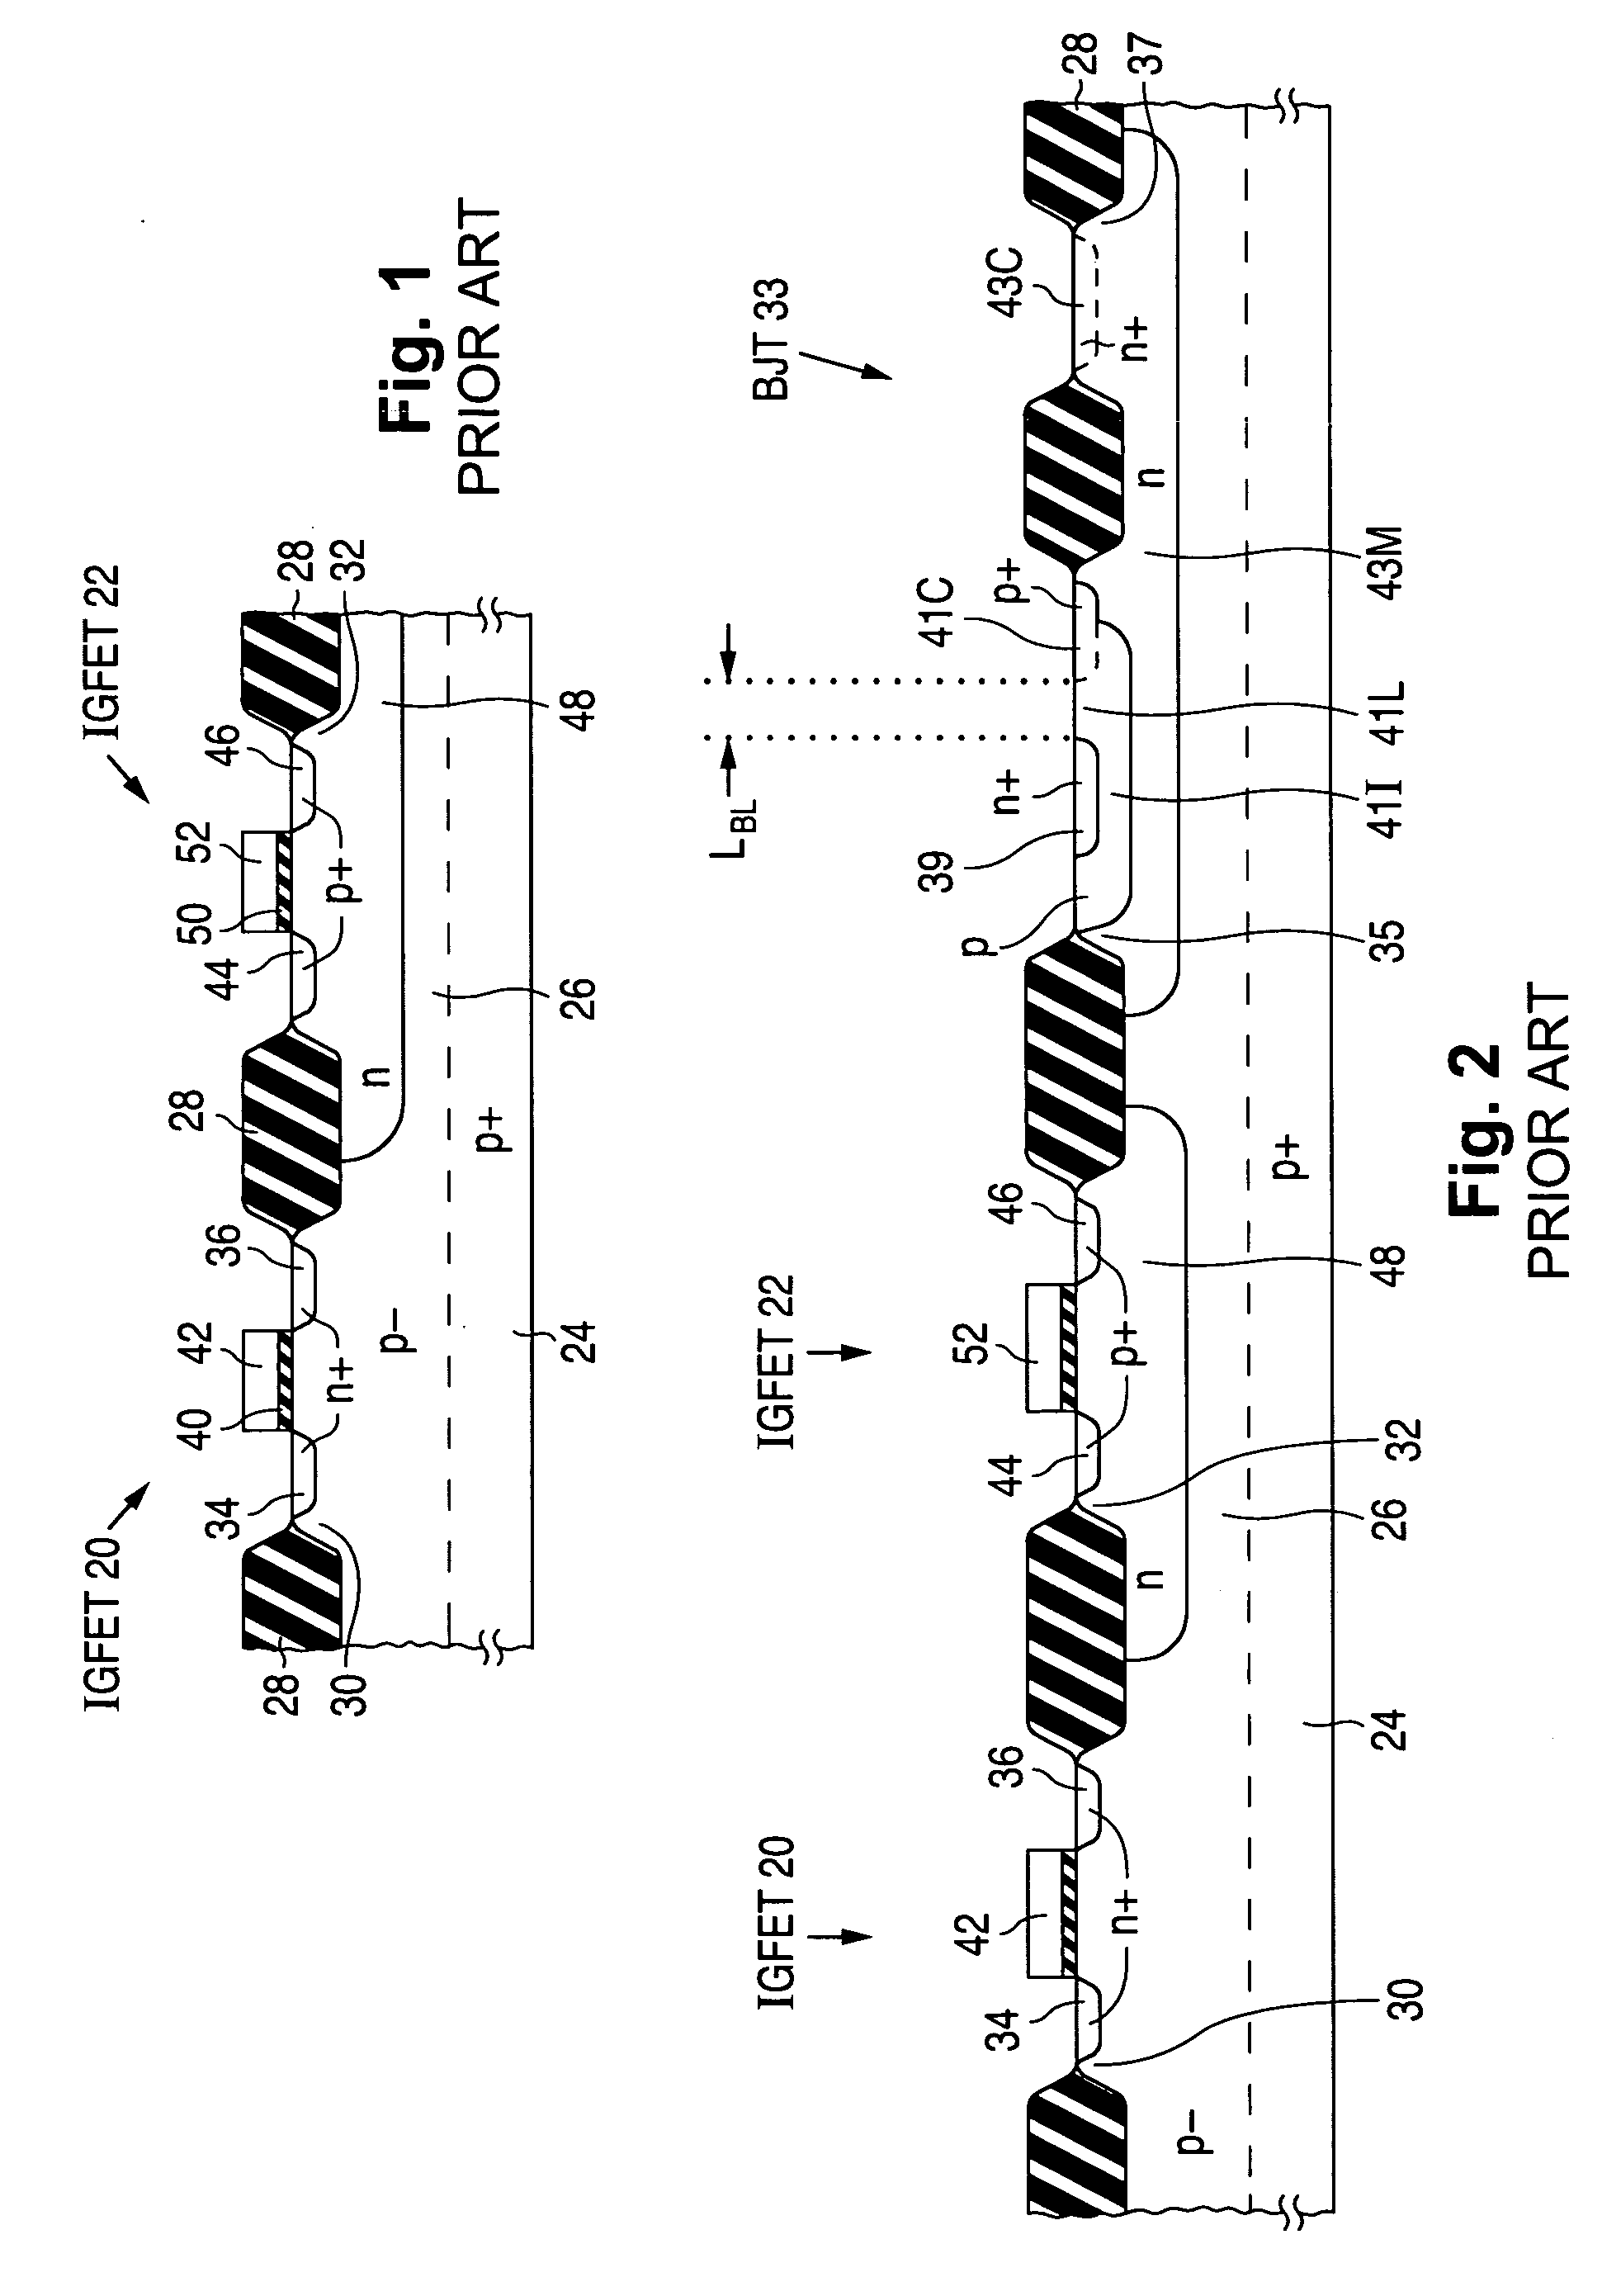 Configuration and fabrication of semiconductor structure having bipolar junction transistor in which non-monocrystalline semiconductor spacing portion controls base-link length